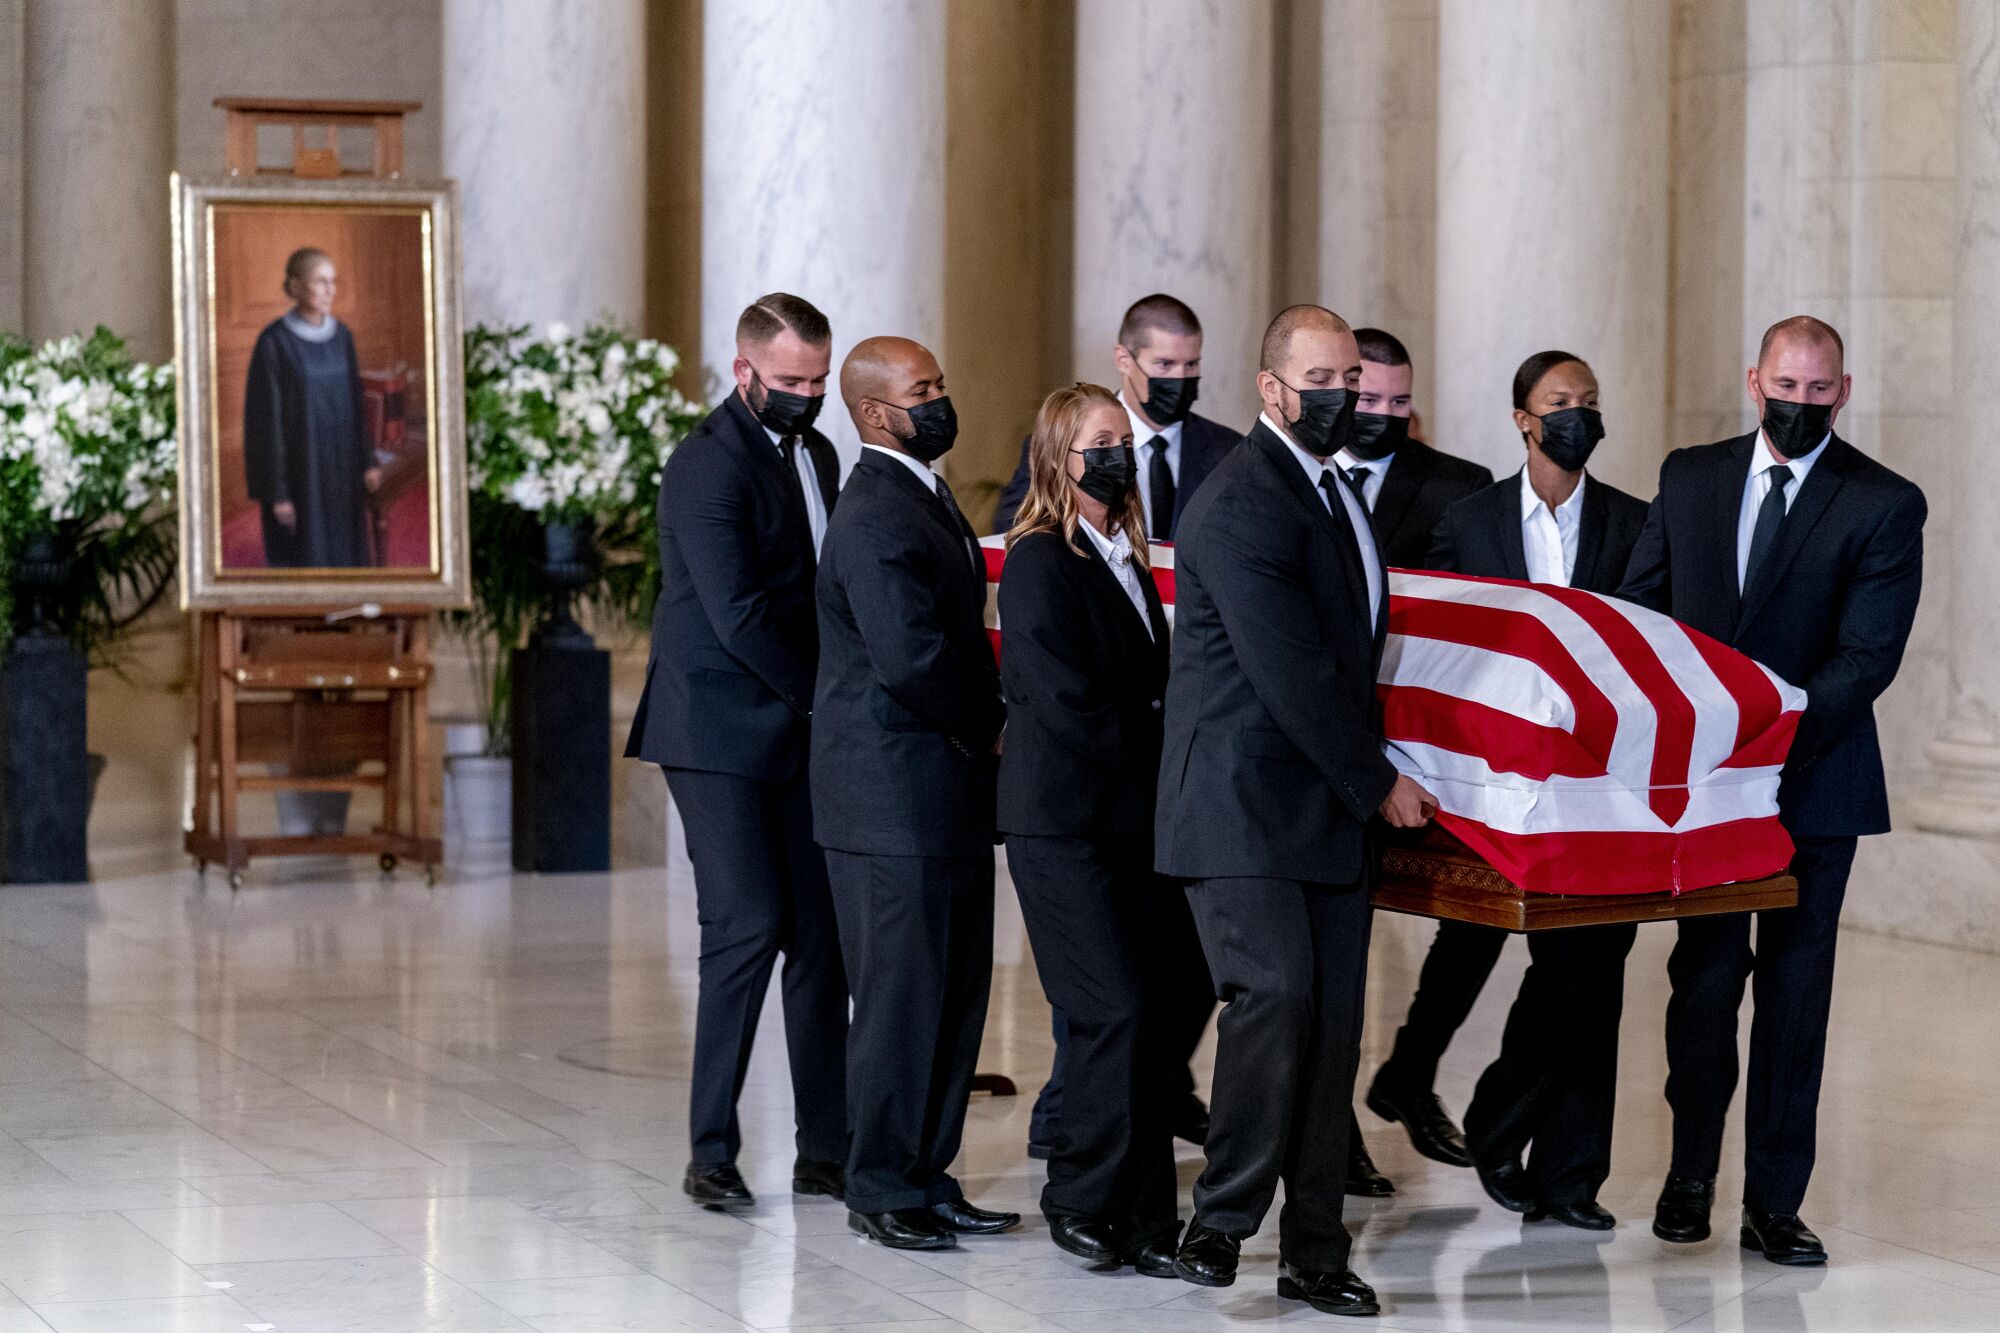 The flag-draped casket of Justice Ruth Bader Ginsburg